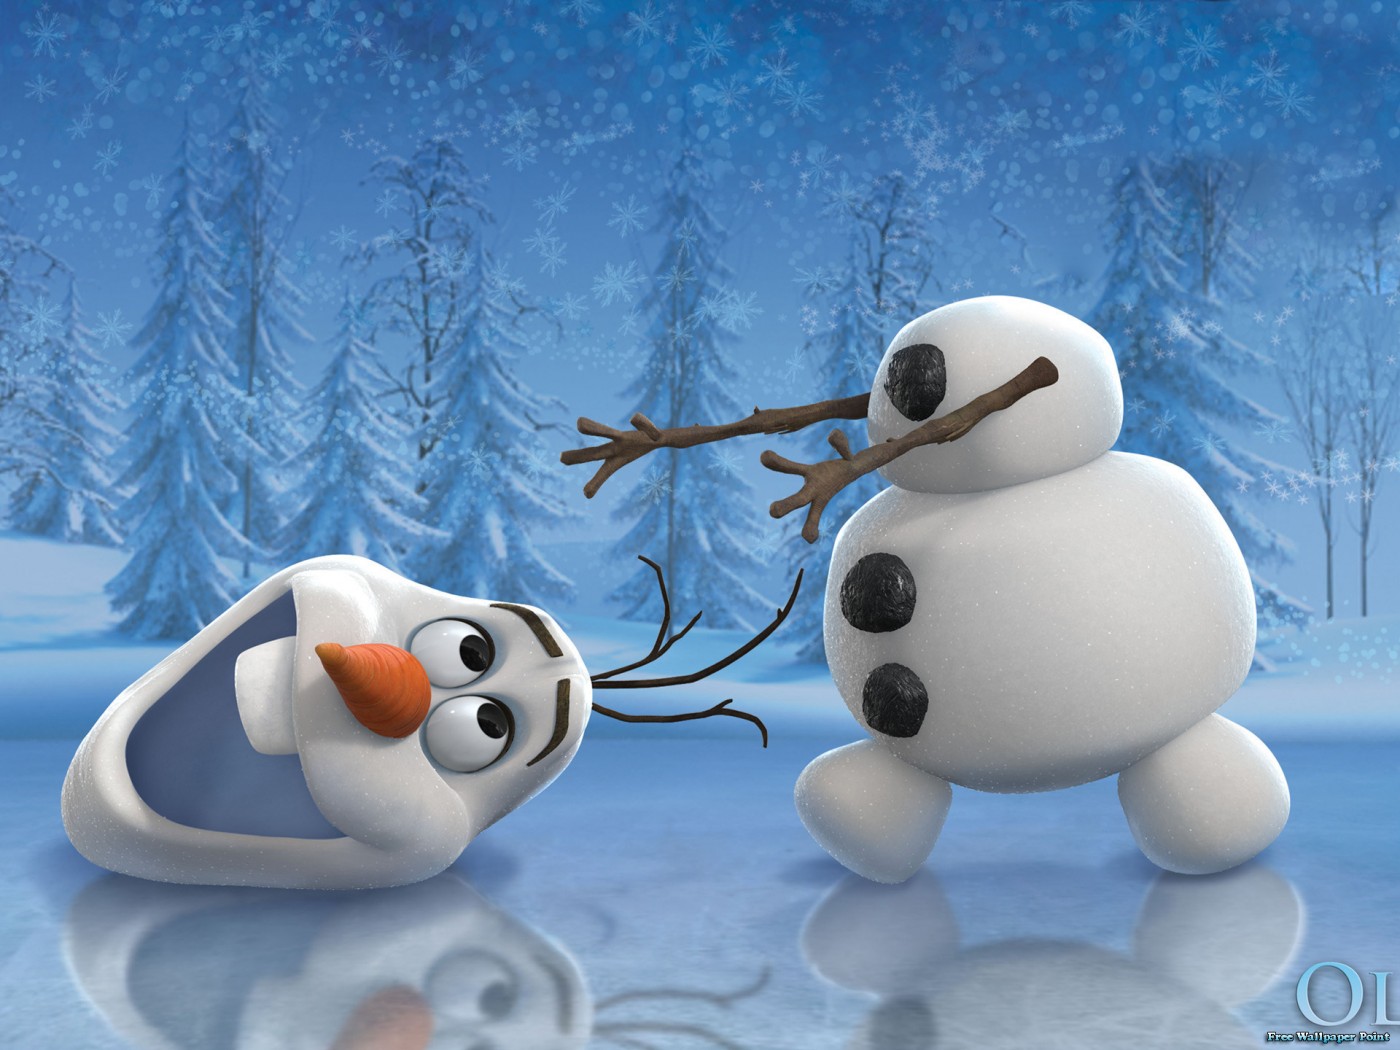 hd wallpapers for mac,snowman,animated cartoon,sky,animation,winter